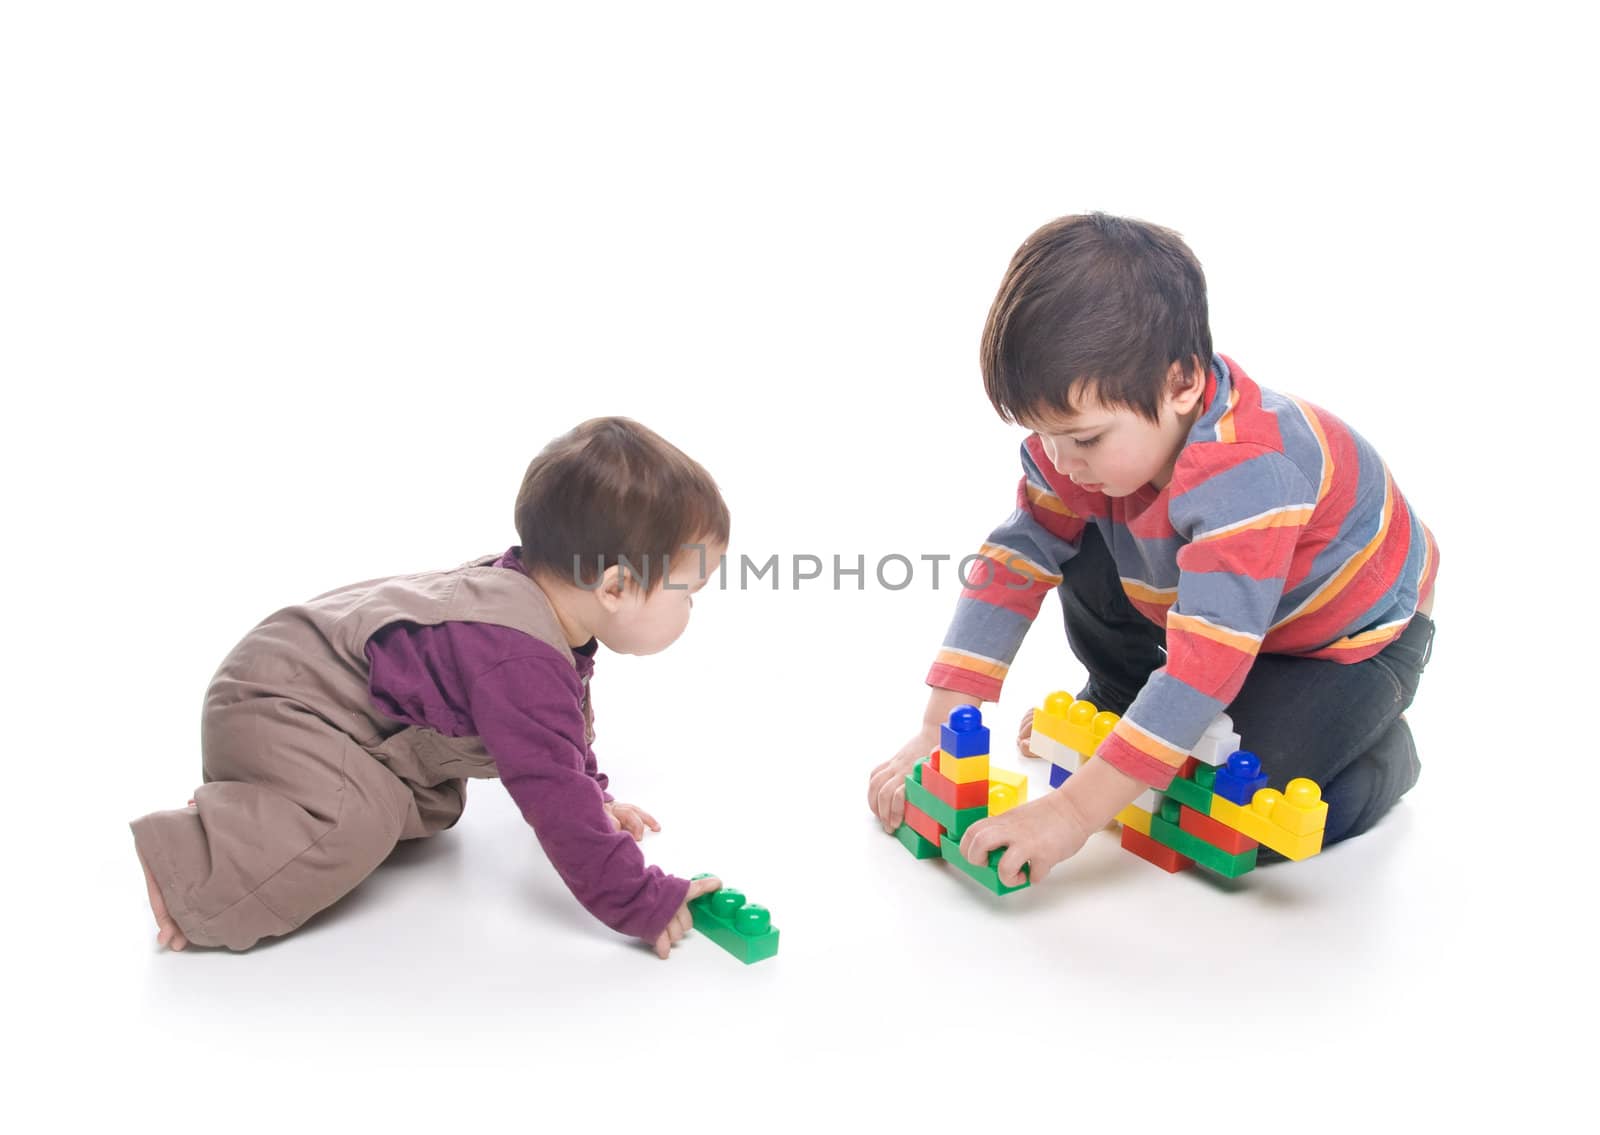 Brother and sister playing together over white background